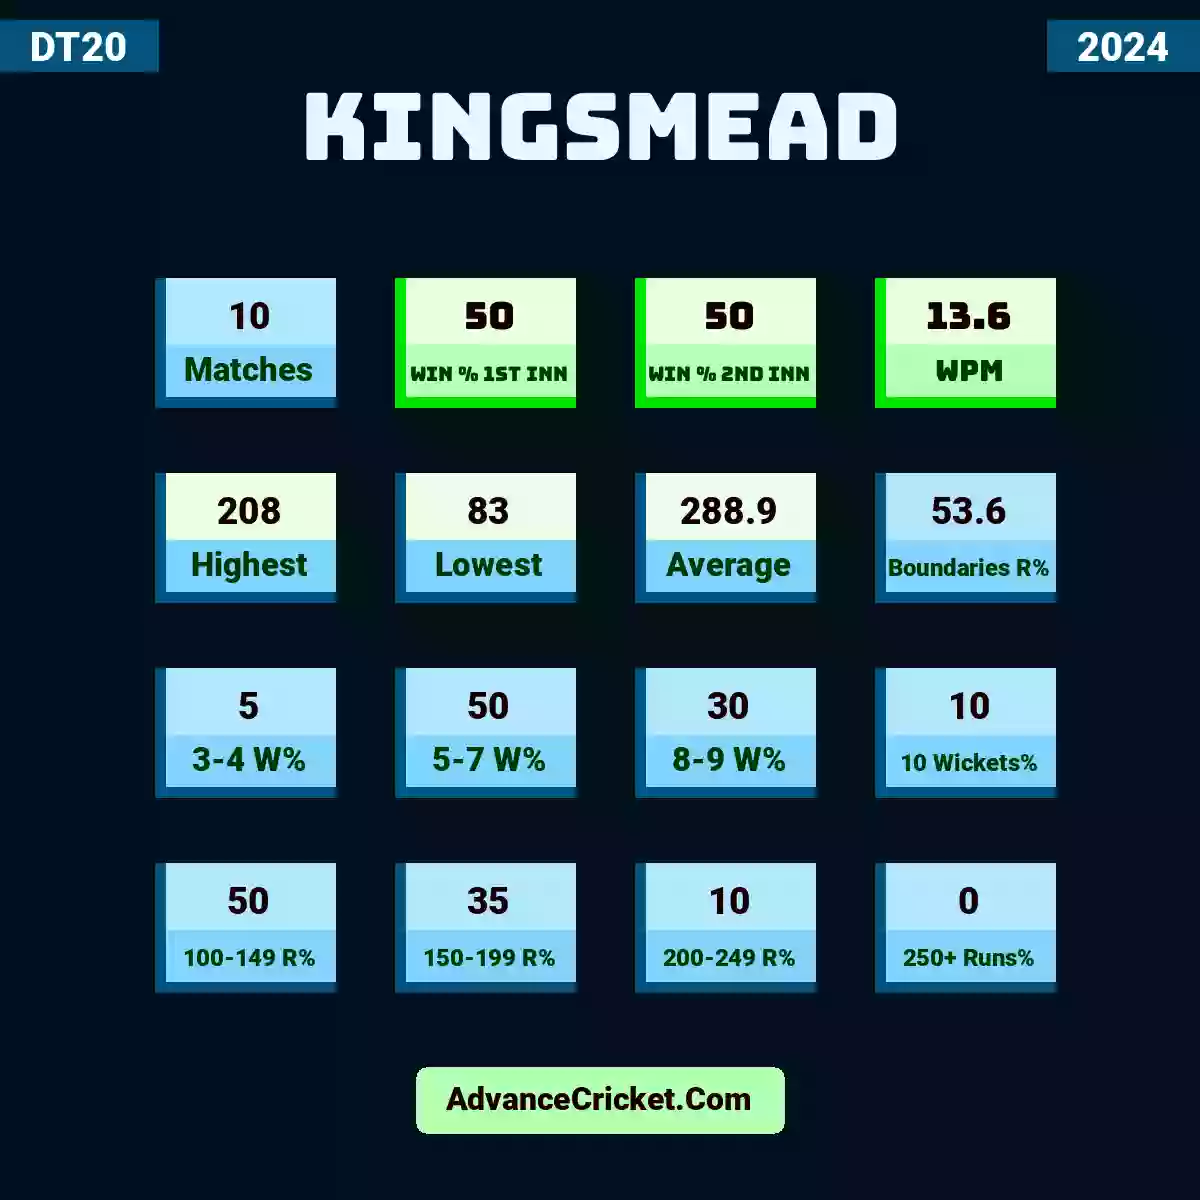 Image showing Kingsmead DT20 2024 with Matches: 10, Win % 1st Inn: 50, Win % 2nd Inn: 50, WPM: 13.6, Highest: 208, Lowest: 83, Average: 288.9, Boundaries R%: 53.6, 3-4 W%: 5, 5-7 W%: 50, 8-9 W%: 30, 10 Wickets%: 10, 100-149 R%: 50, 150-199 R%: 35, 200-249 R%: 10, 250+ Runs%: 0.